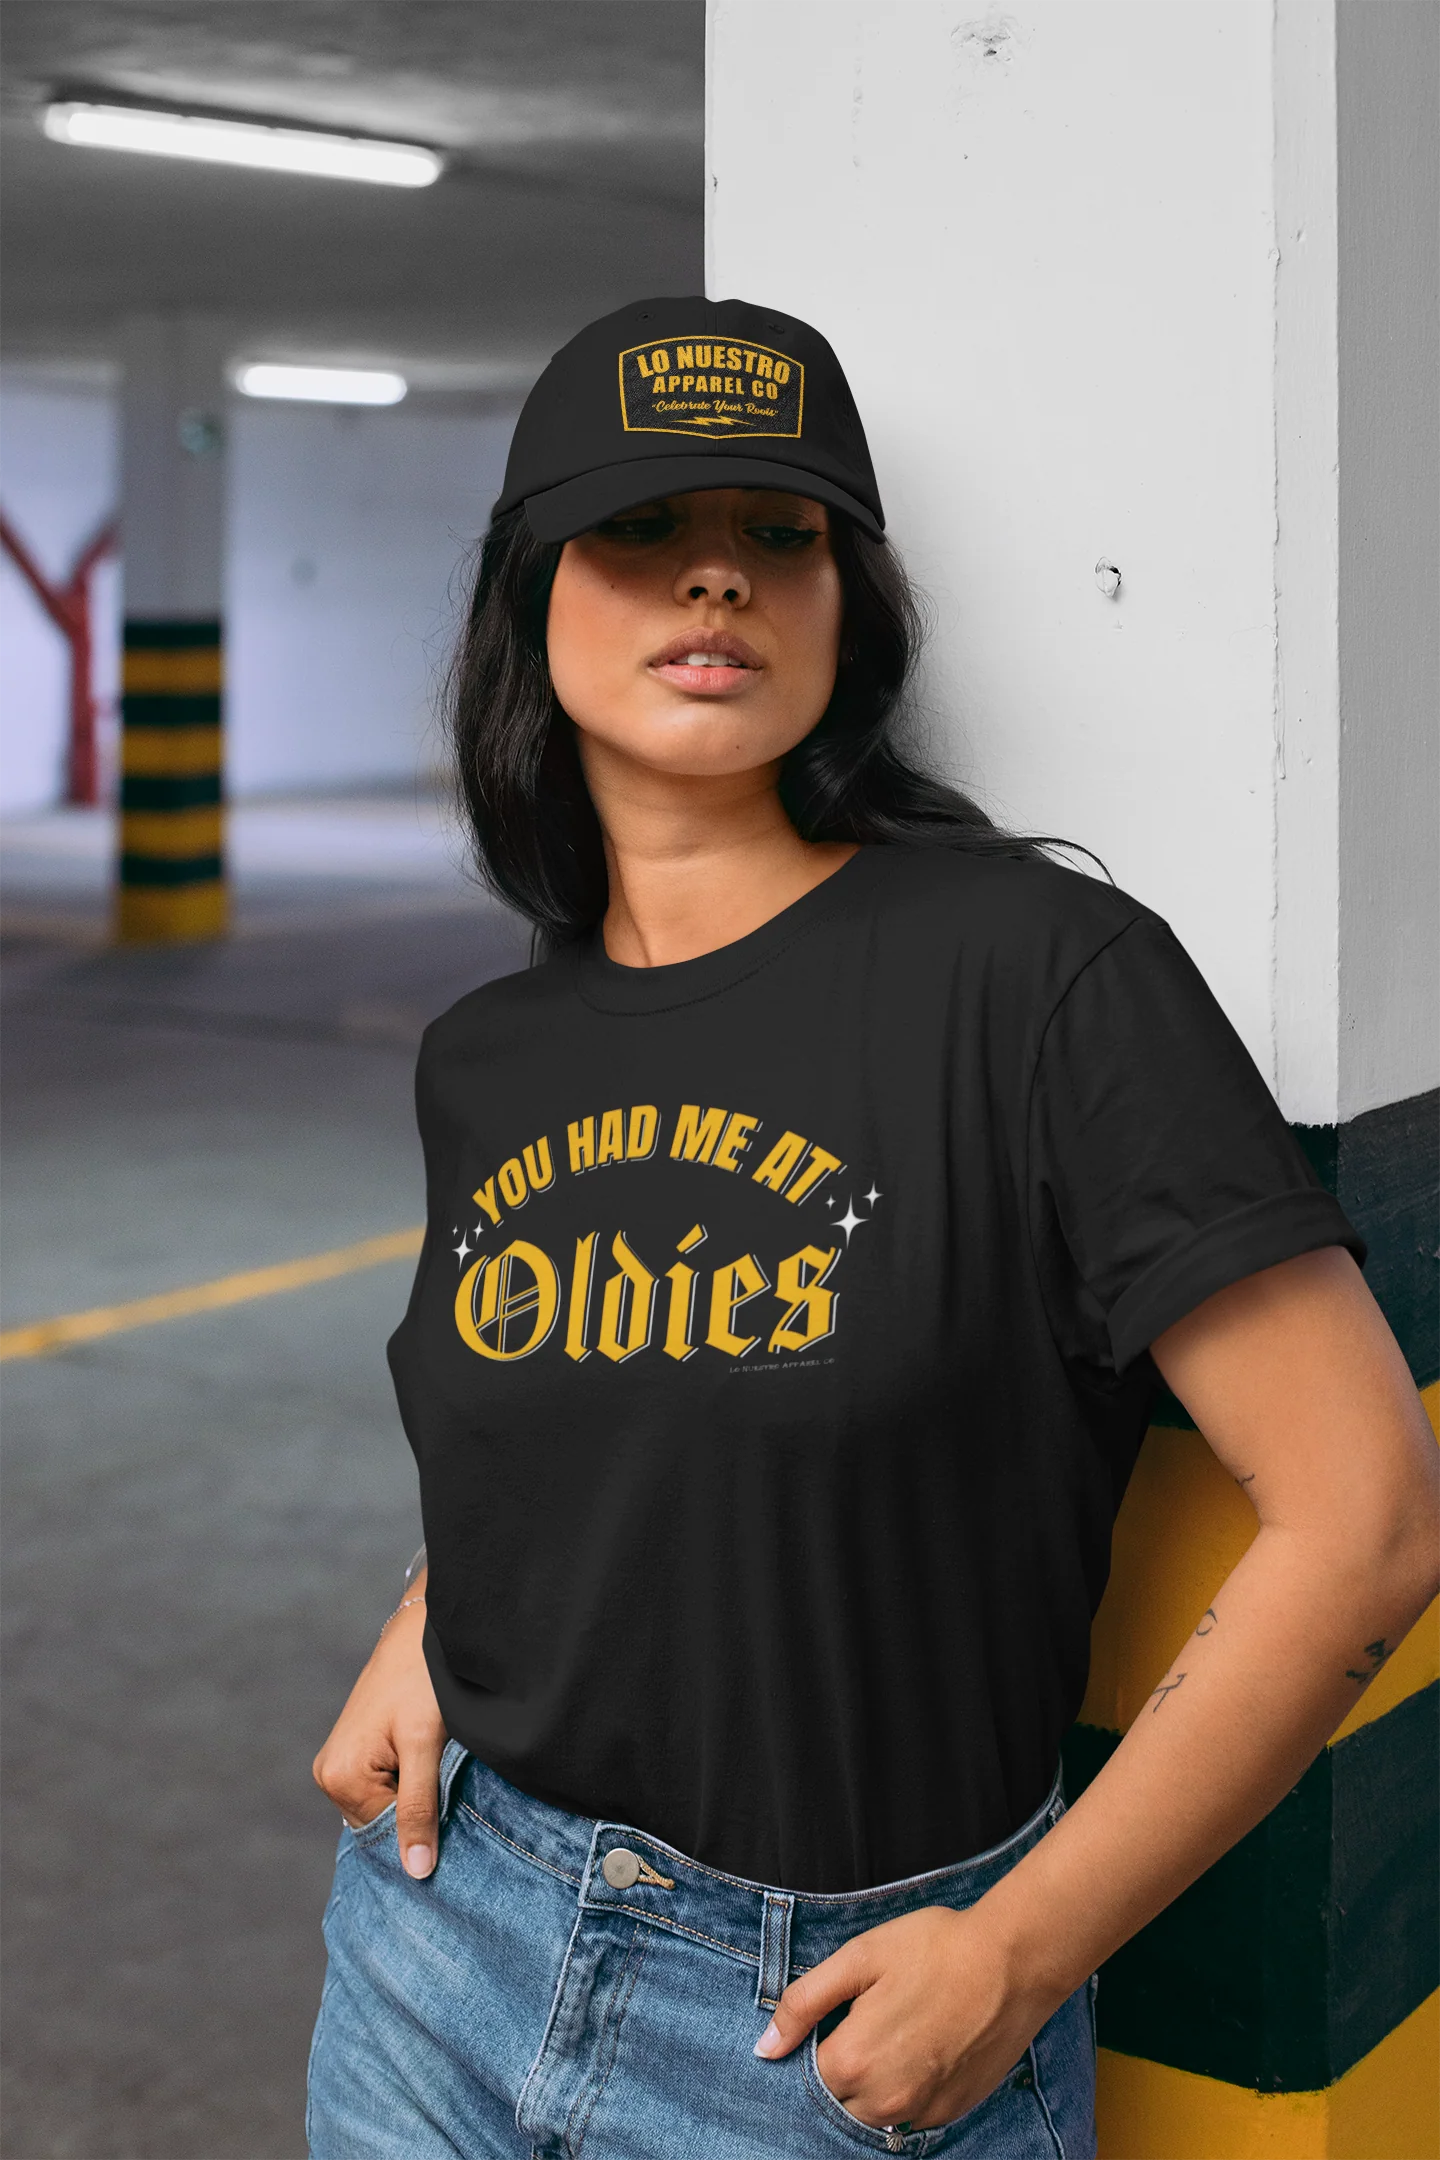 Woman wearing a black "You Had Me at Oldies" T-shirt with bold yellow old English lettering, standing in a parking lot and leaning against a wall, also wearing a black "Lo Nuestro Apparel Co." hat.